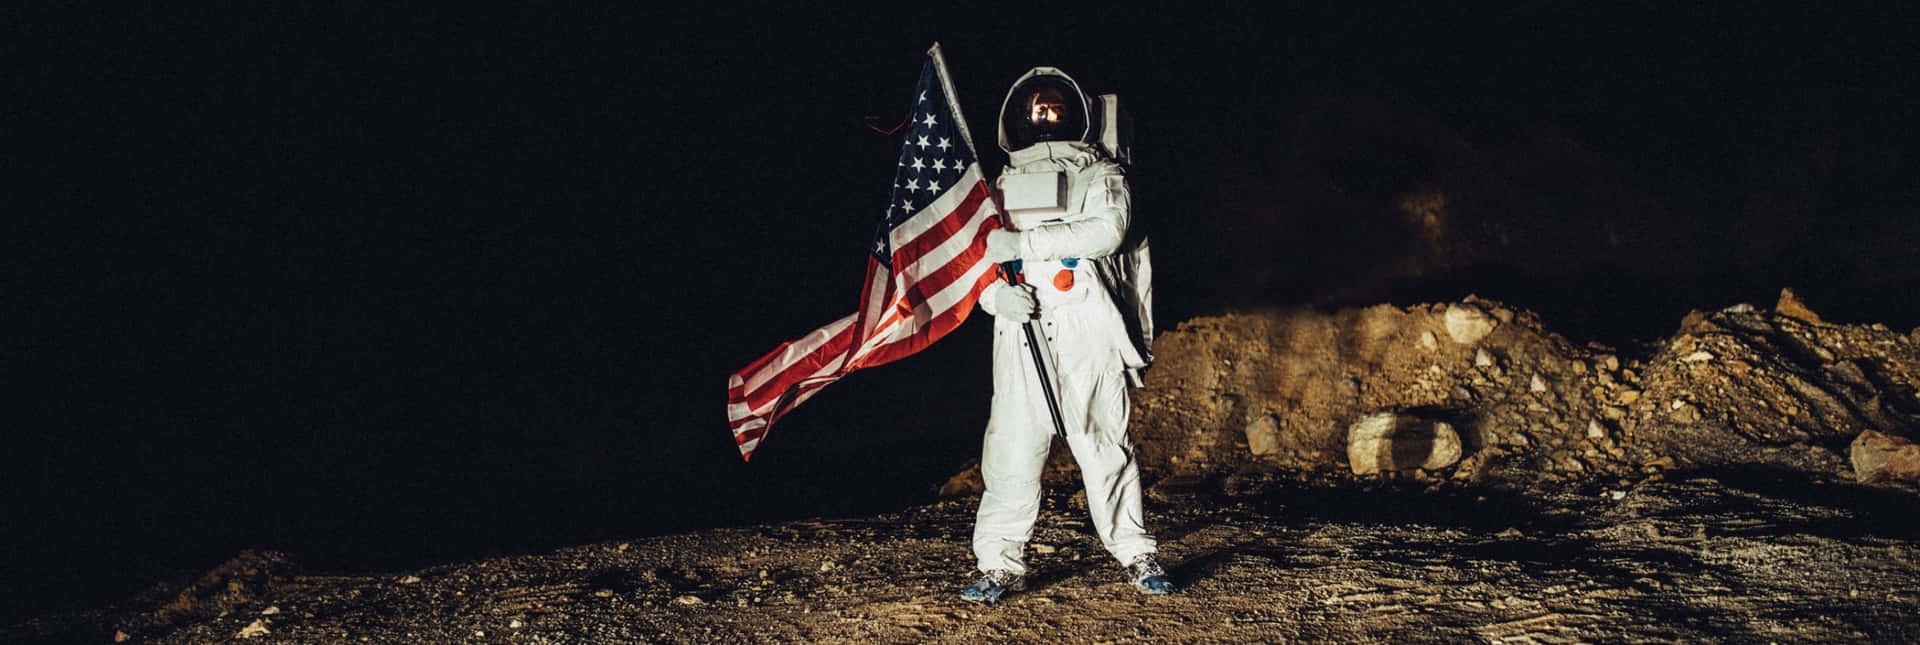 A Man In A Space Suit Holding An American Flag